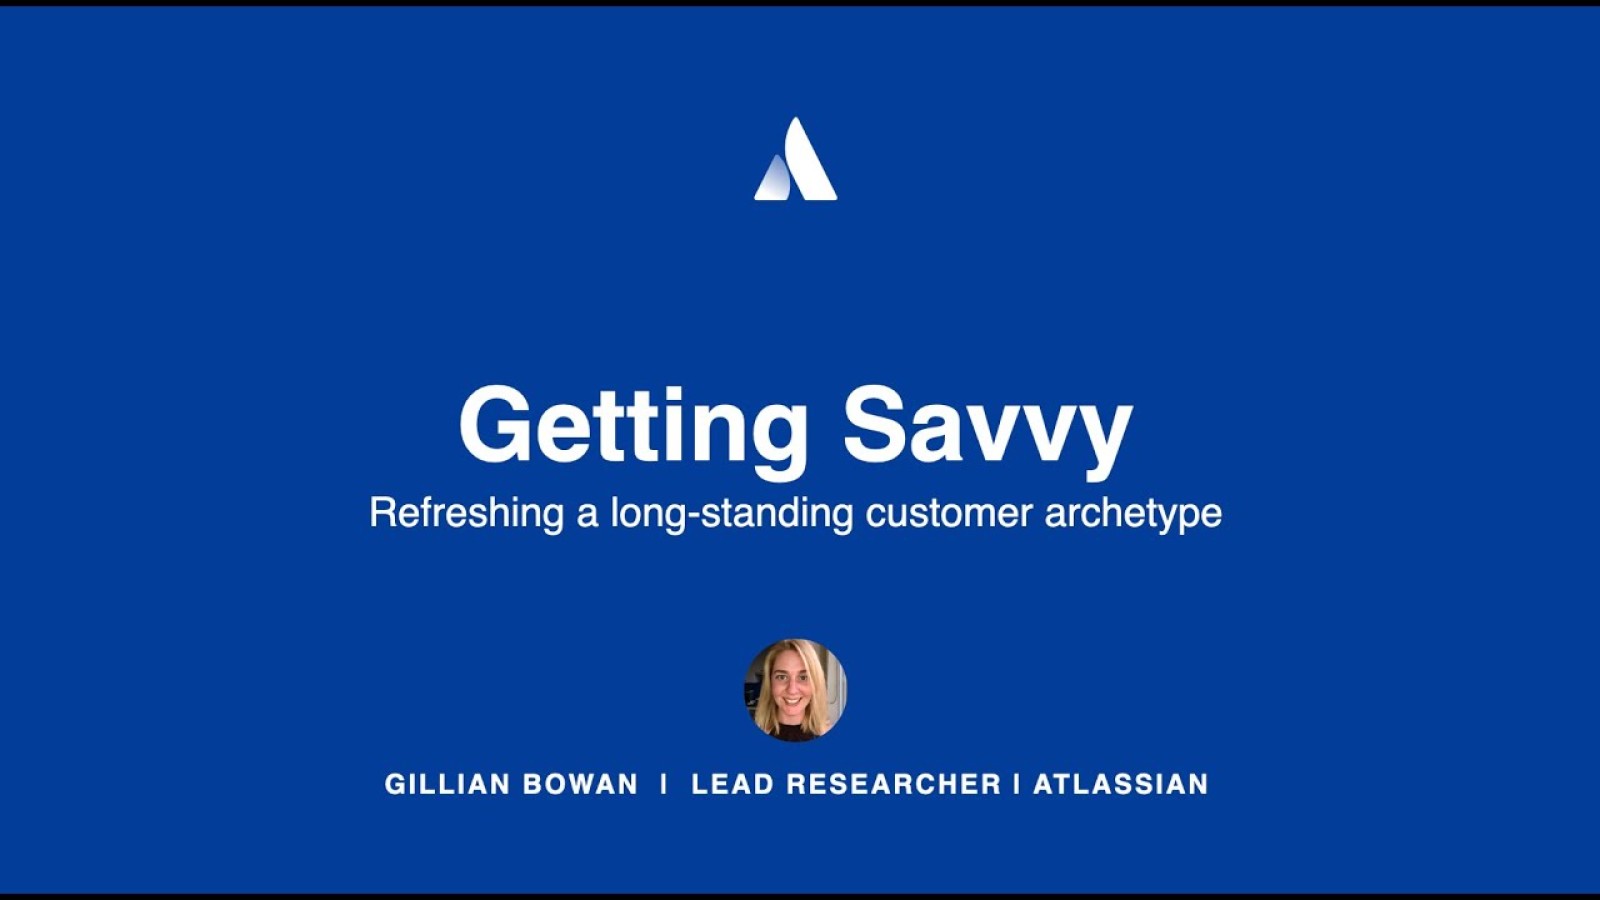 Getting Savvy. Refreshing a long-standing customer archetype at Atlassian